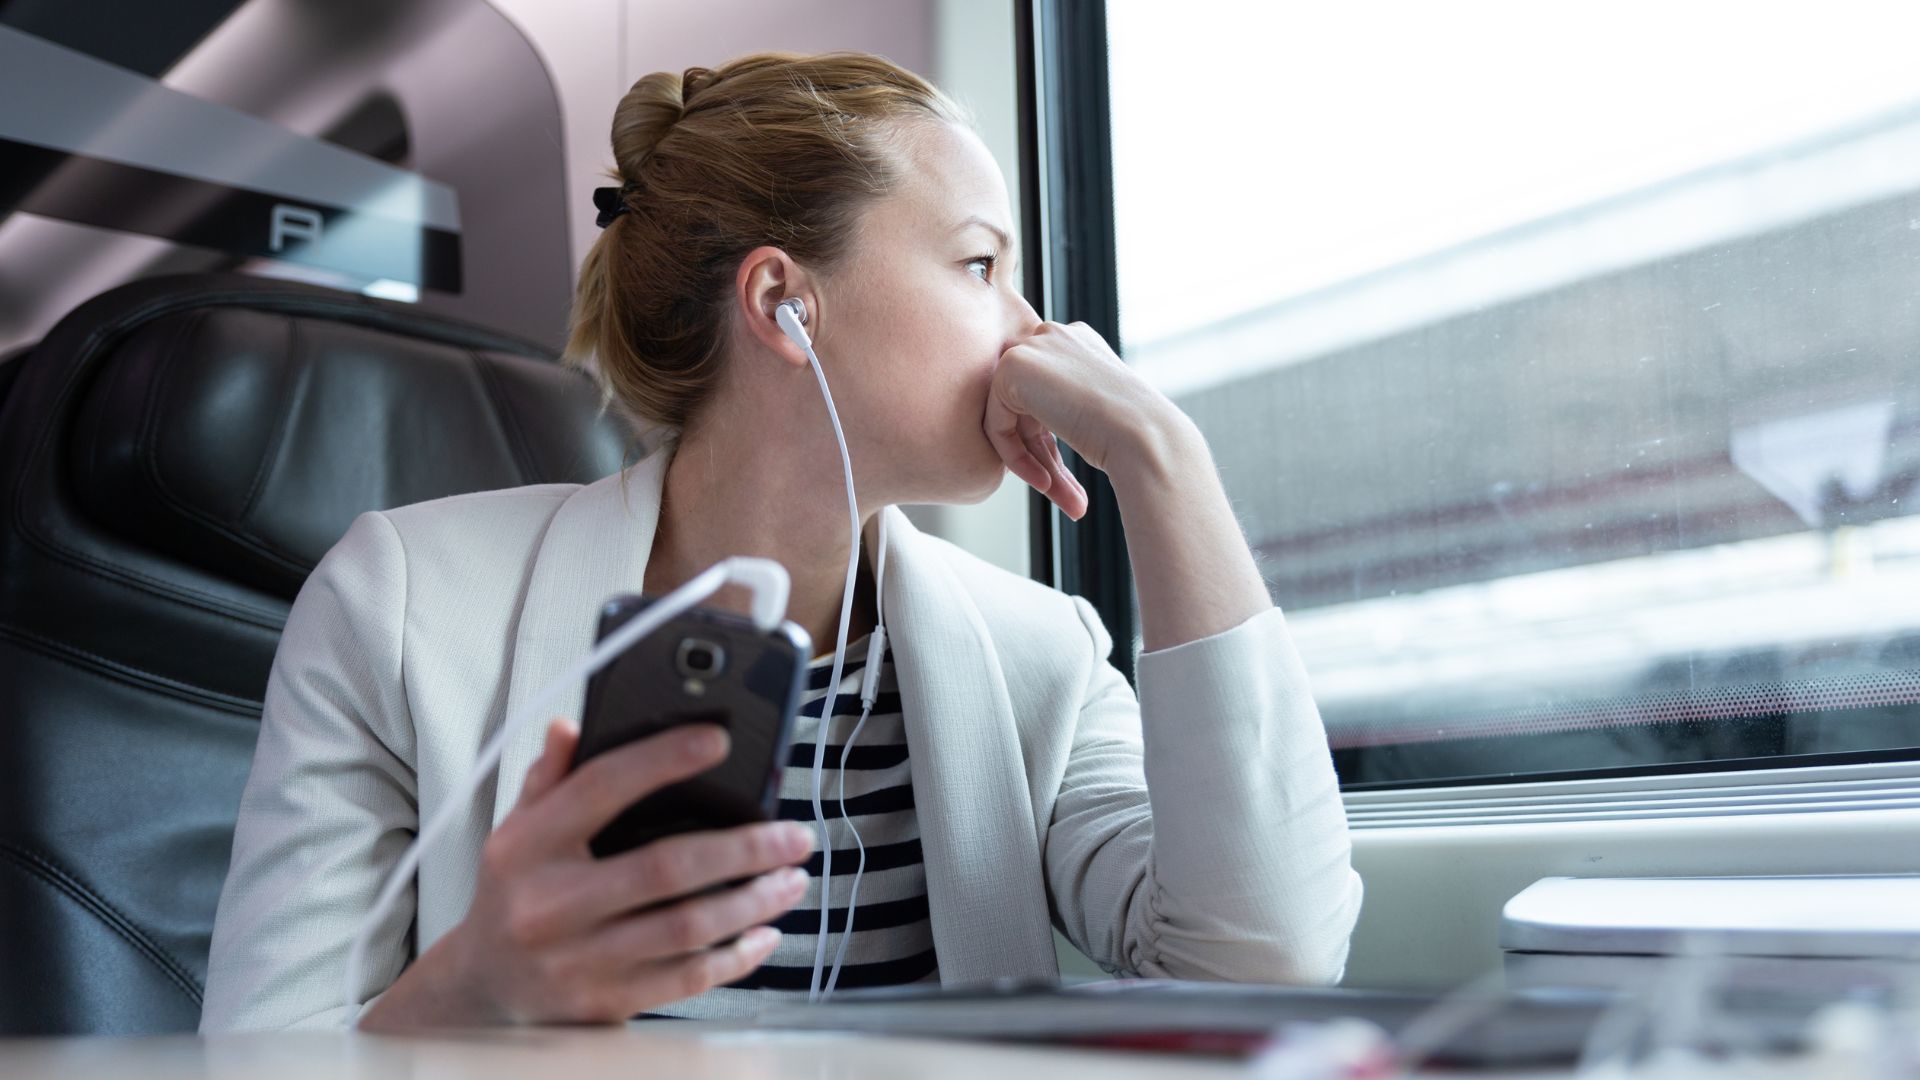 7 Podcasts Every Recruiter Should Listen To